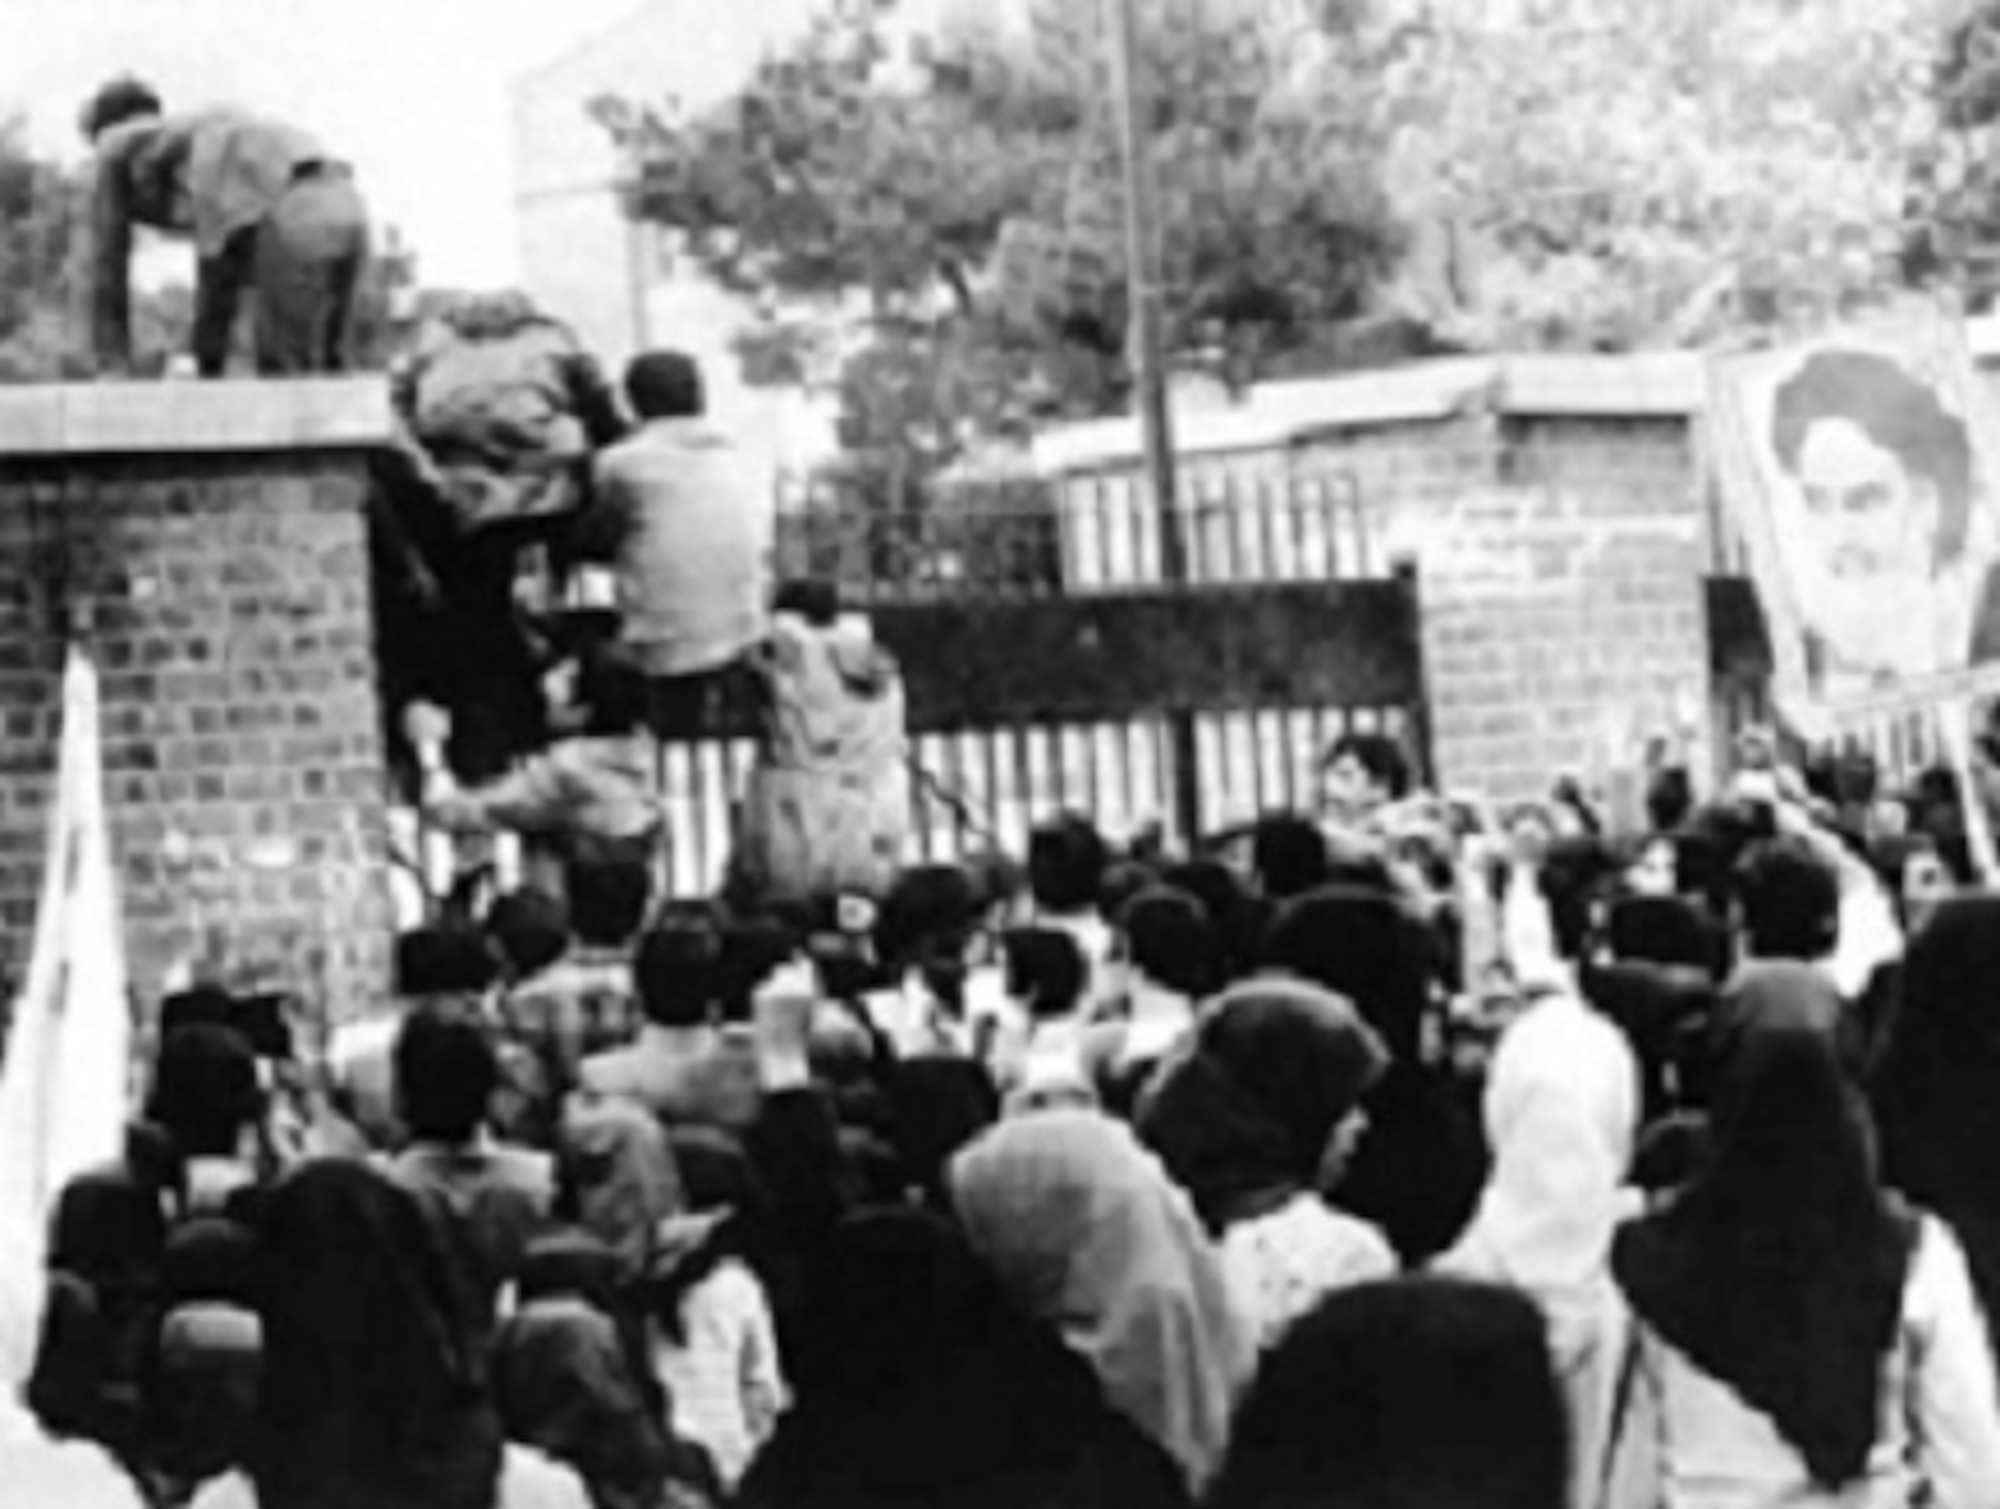 After thousands of Iranian militant students stormed the U.S. Embassy in Tehran, Iran, 66 Americans were seized and held hostage. The attempt to rescue them ended in disaster at the Desert One refueling site in April 1980. As a result, the Holloway Commission convened to analyze why the mission failed and recommend corrective actions. This led to the gradual reorganization and the birth of United States Special Operations Forces. (courtesy photo)